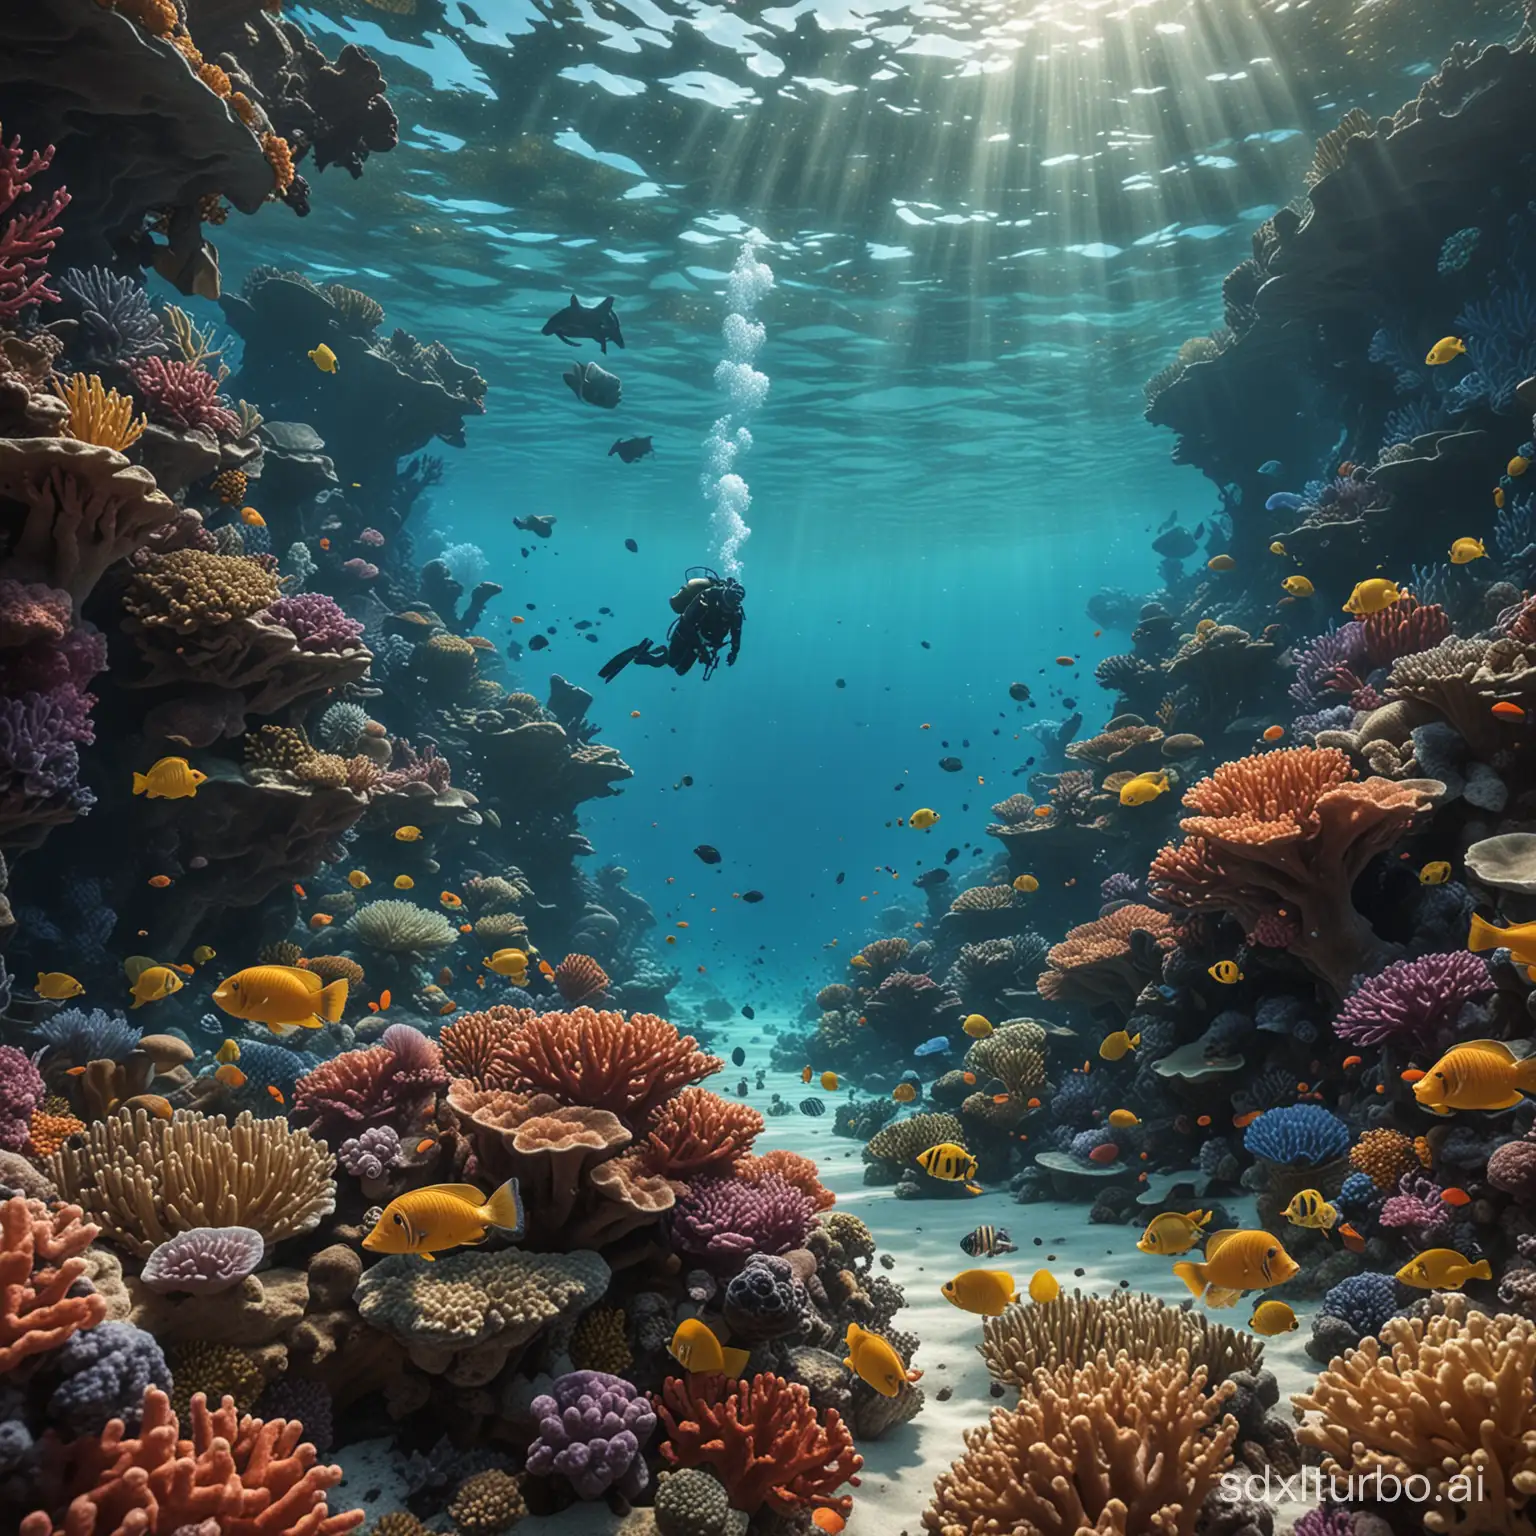 Vibrant-Coral-Reef-Underwater-Photography-with-Scuba-Diver-ZootopiaInspired-Marine-Life